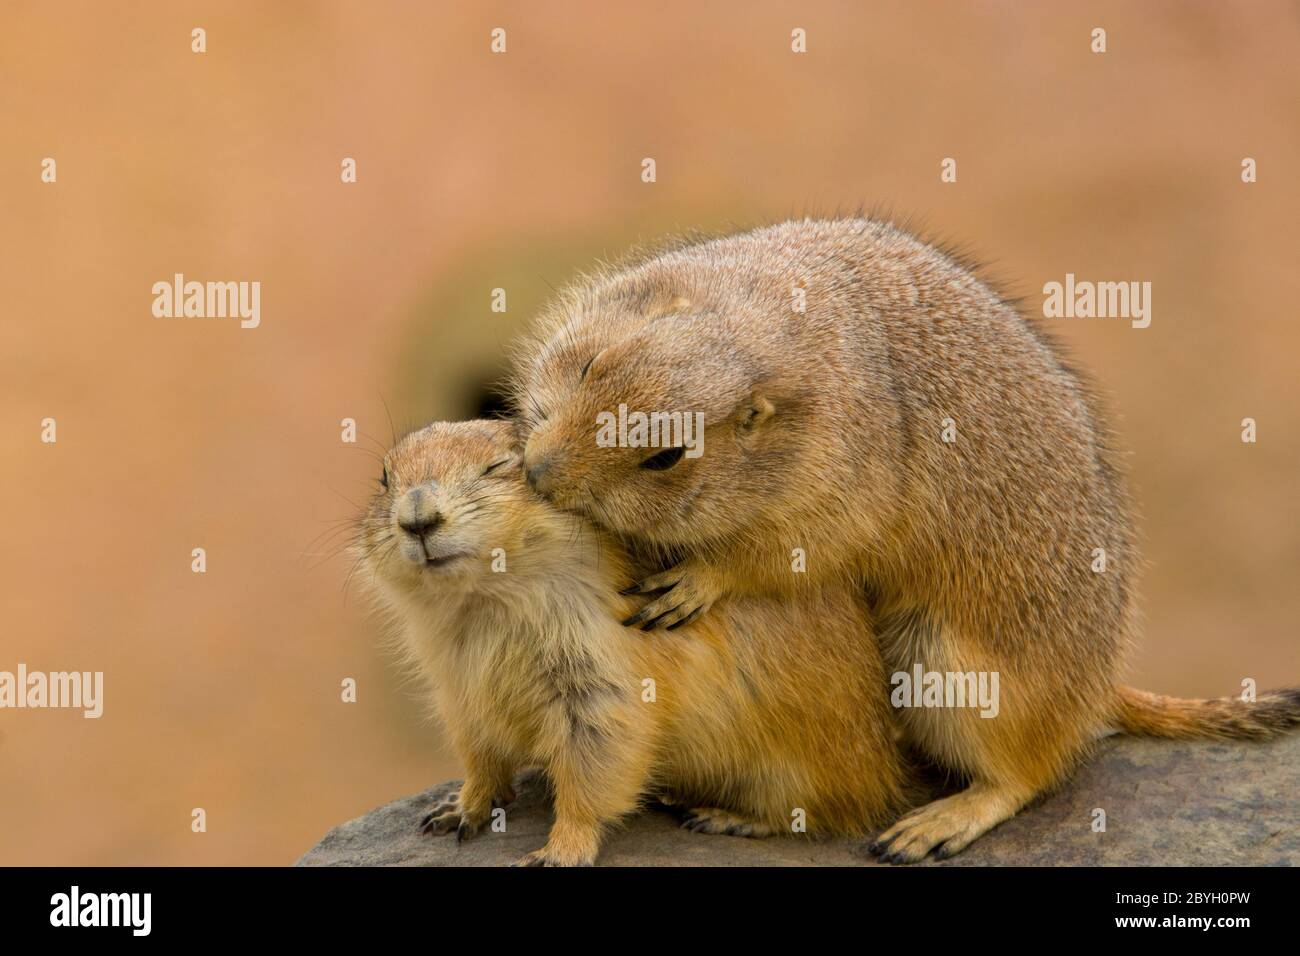 A pair of Black tailed prairie dogs are kissing, It is a rodent of the family Sciuridae found in the Great Plains of North America. Stock Photo